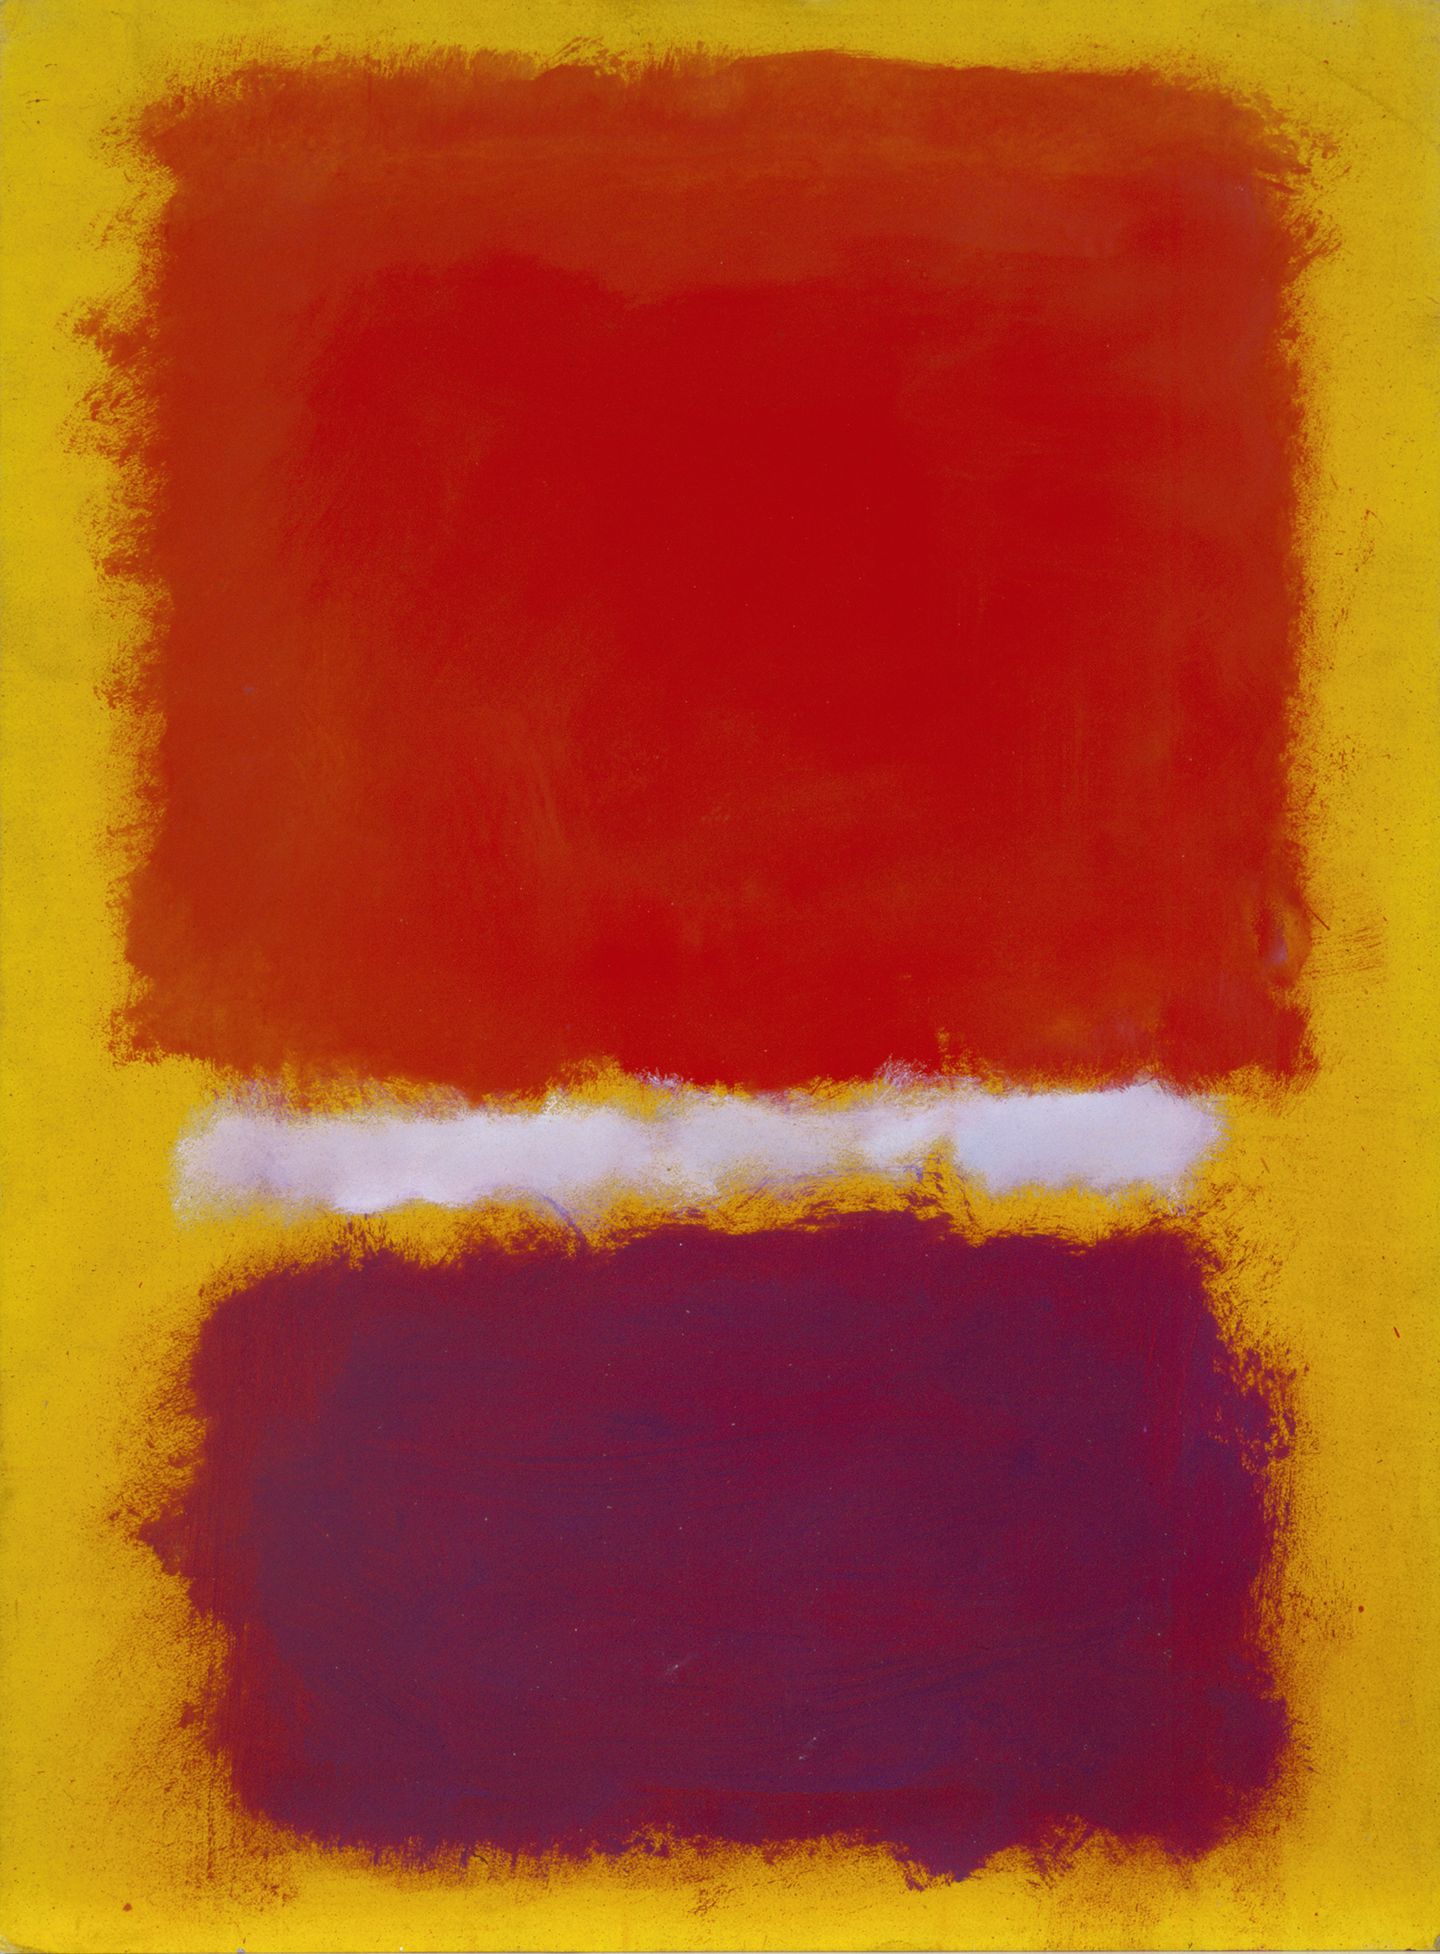 Mark Rothko, Untitled (c. 1959/1968). Tempera on paper drawing board. 77.5 cm × 57.2 cm; 89.9 cm × 69.5 cm × 4.4 cm, frame. © Kate Rothko Prizel and Christopher Rothko. Courtesy Pace Gallery.